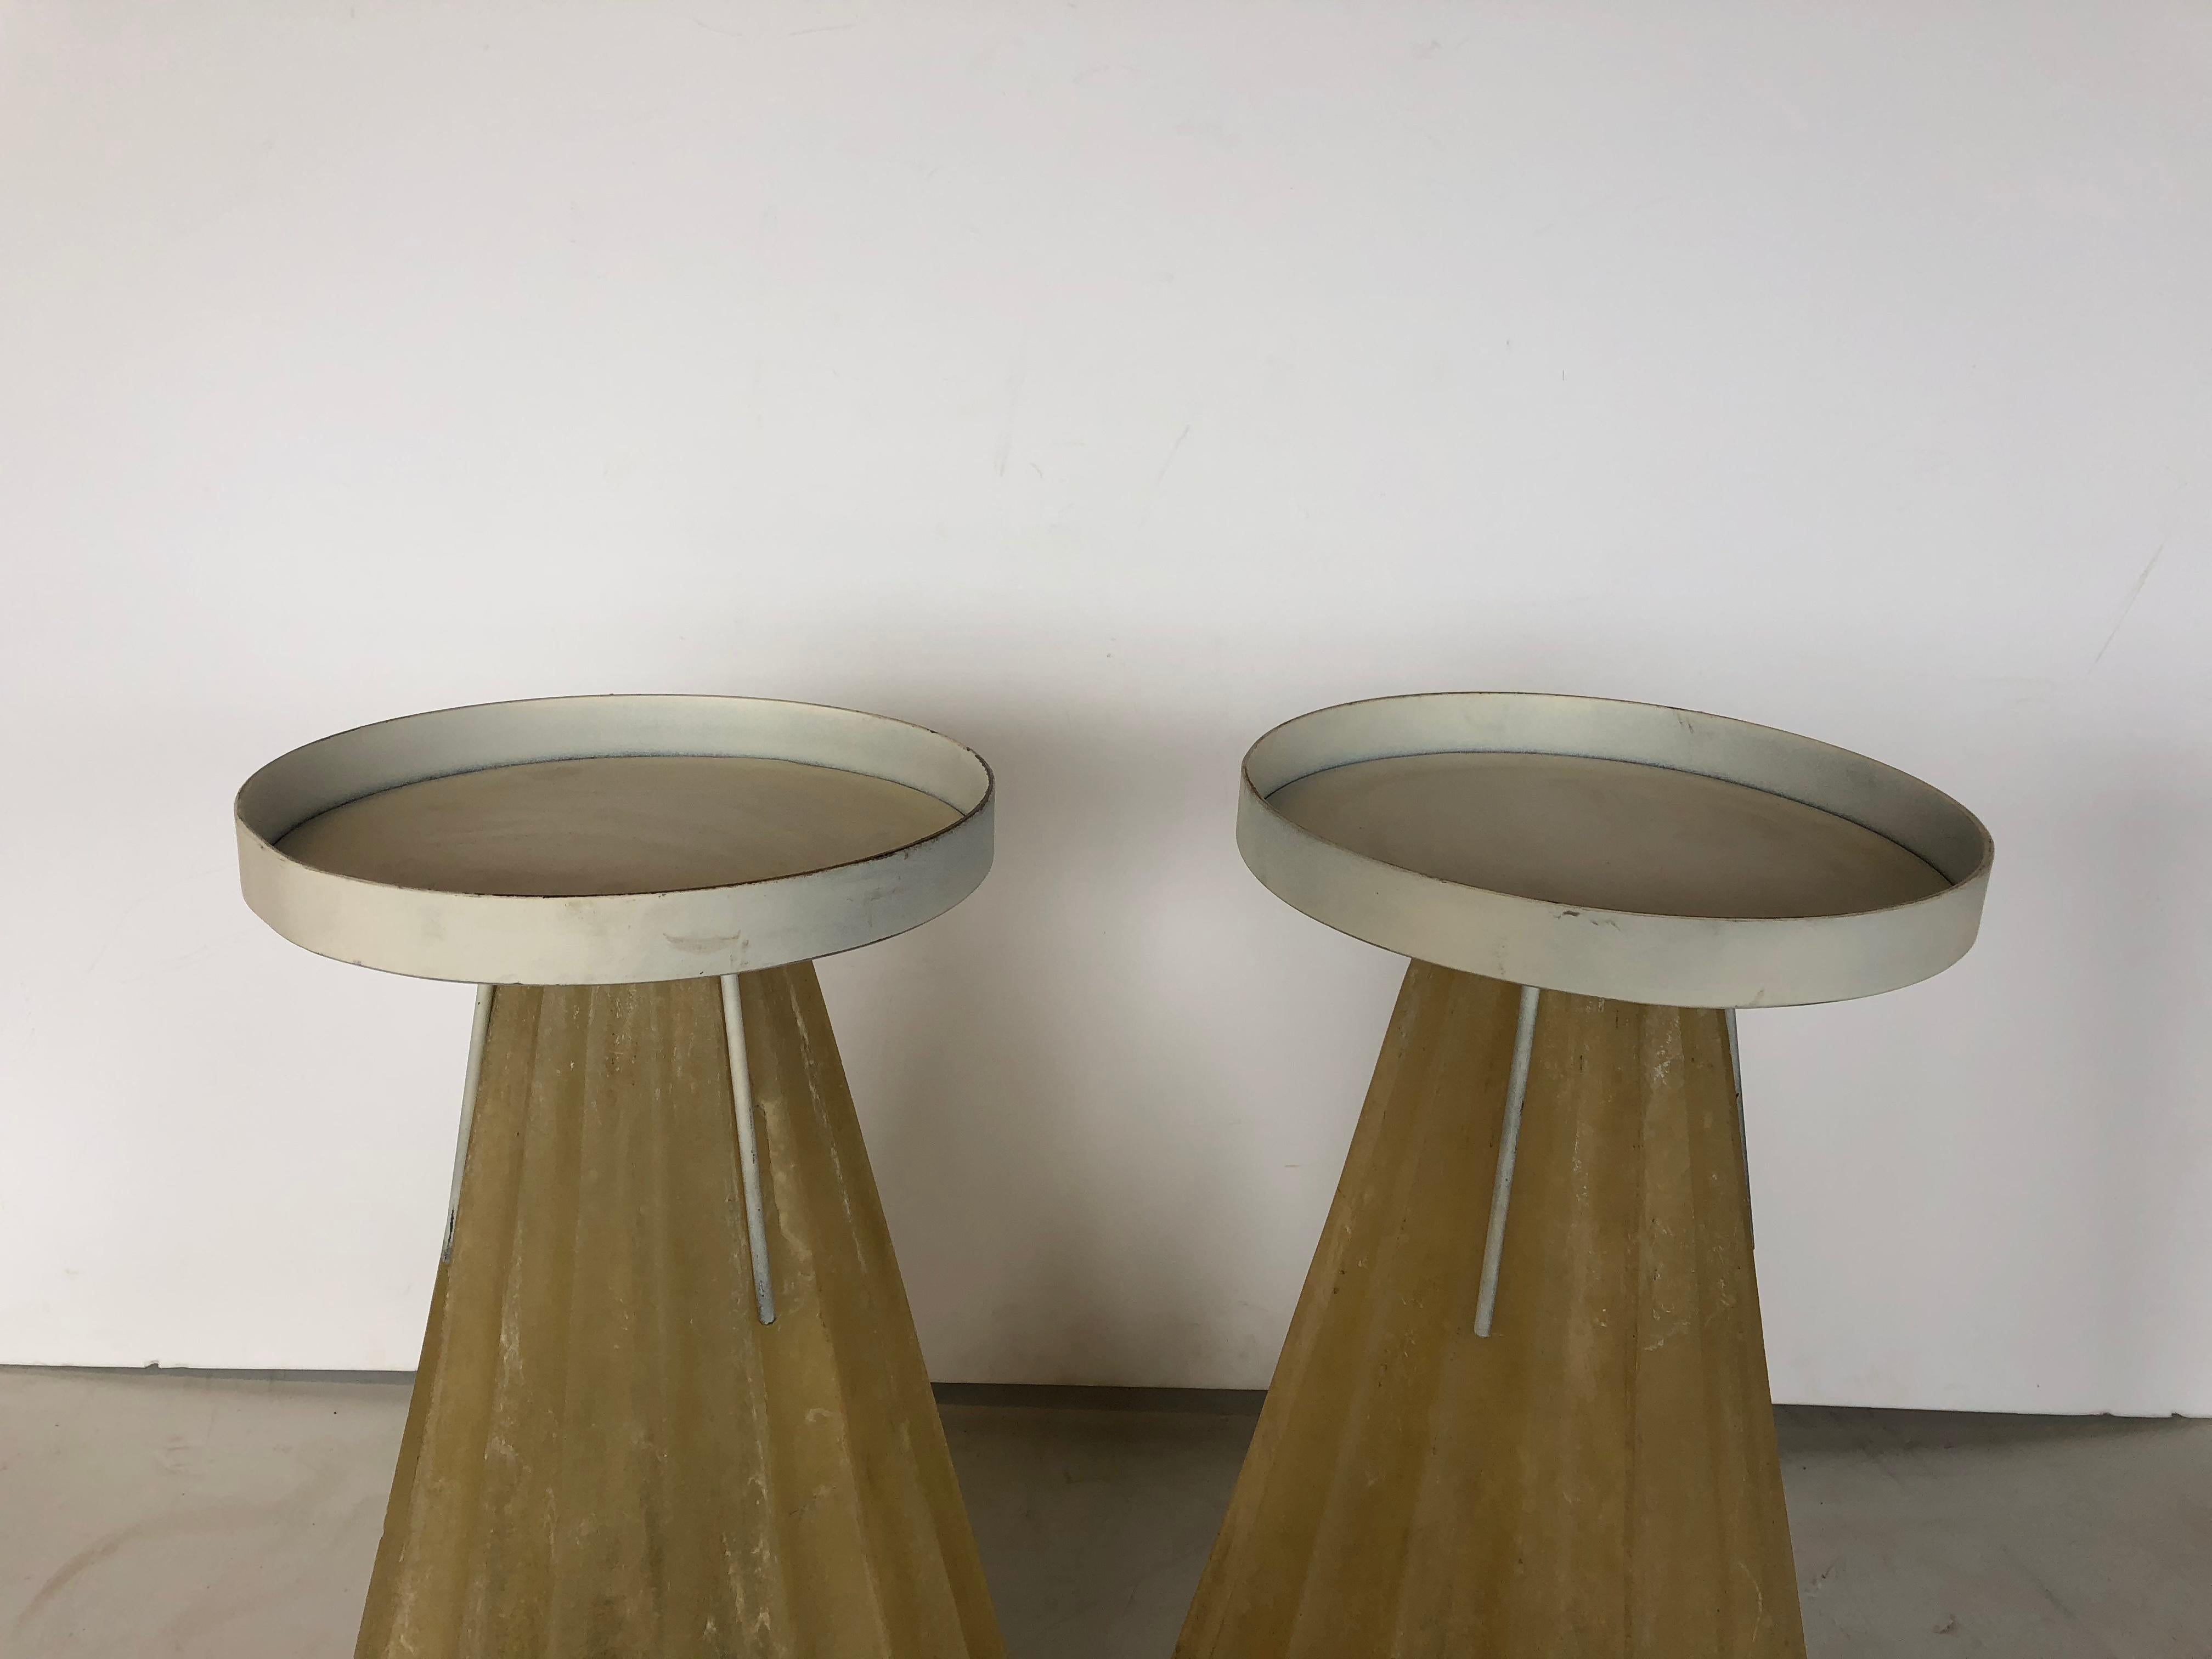 American Midcentury Fiberglass Pedestals or Plant Stands For Sale